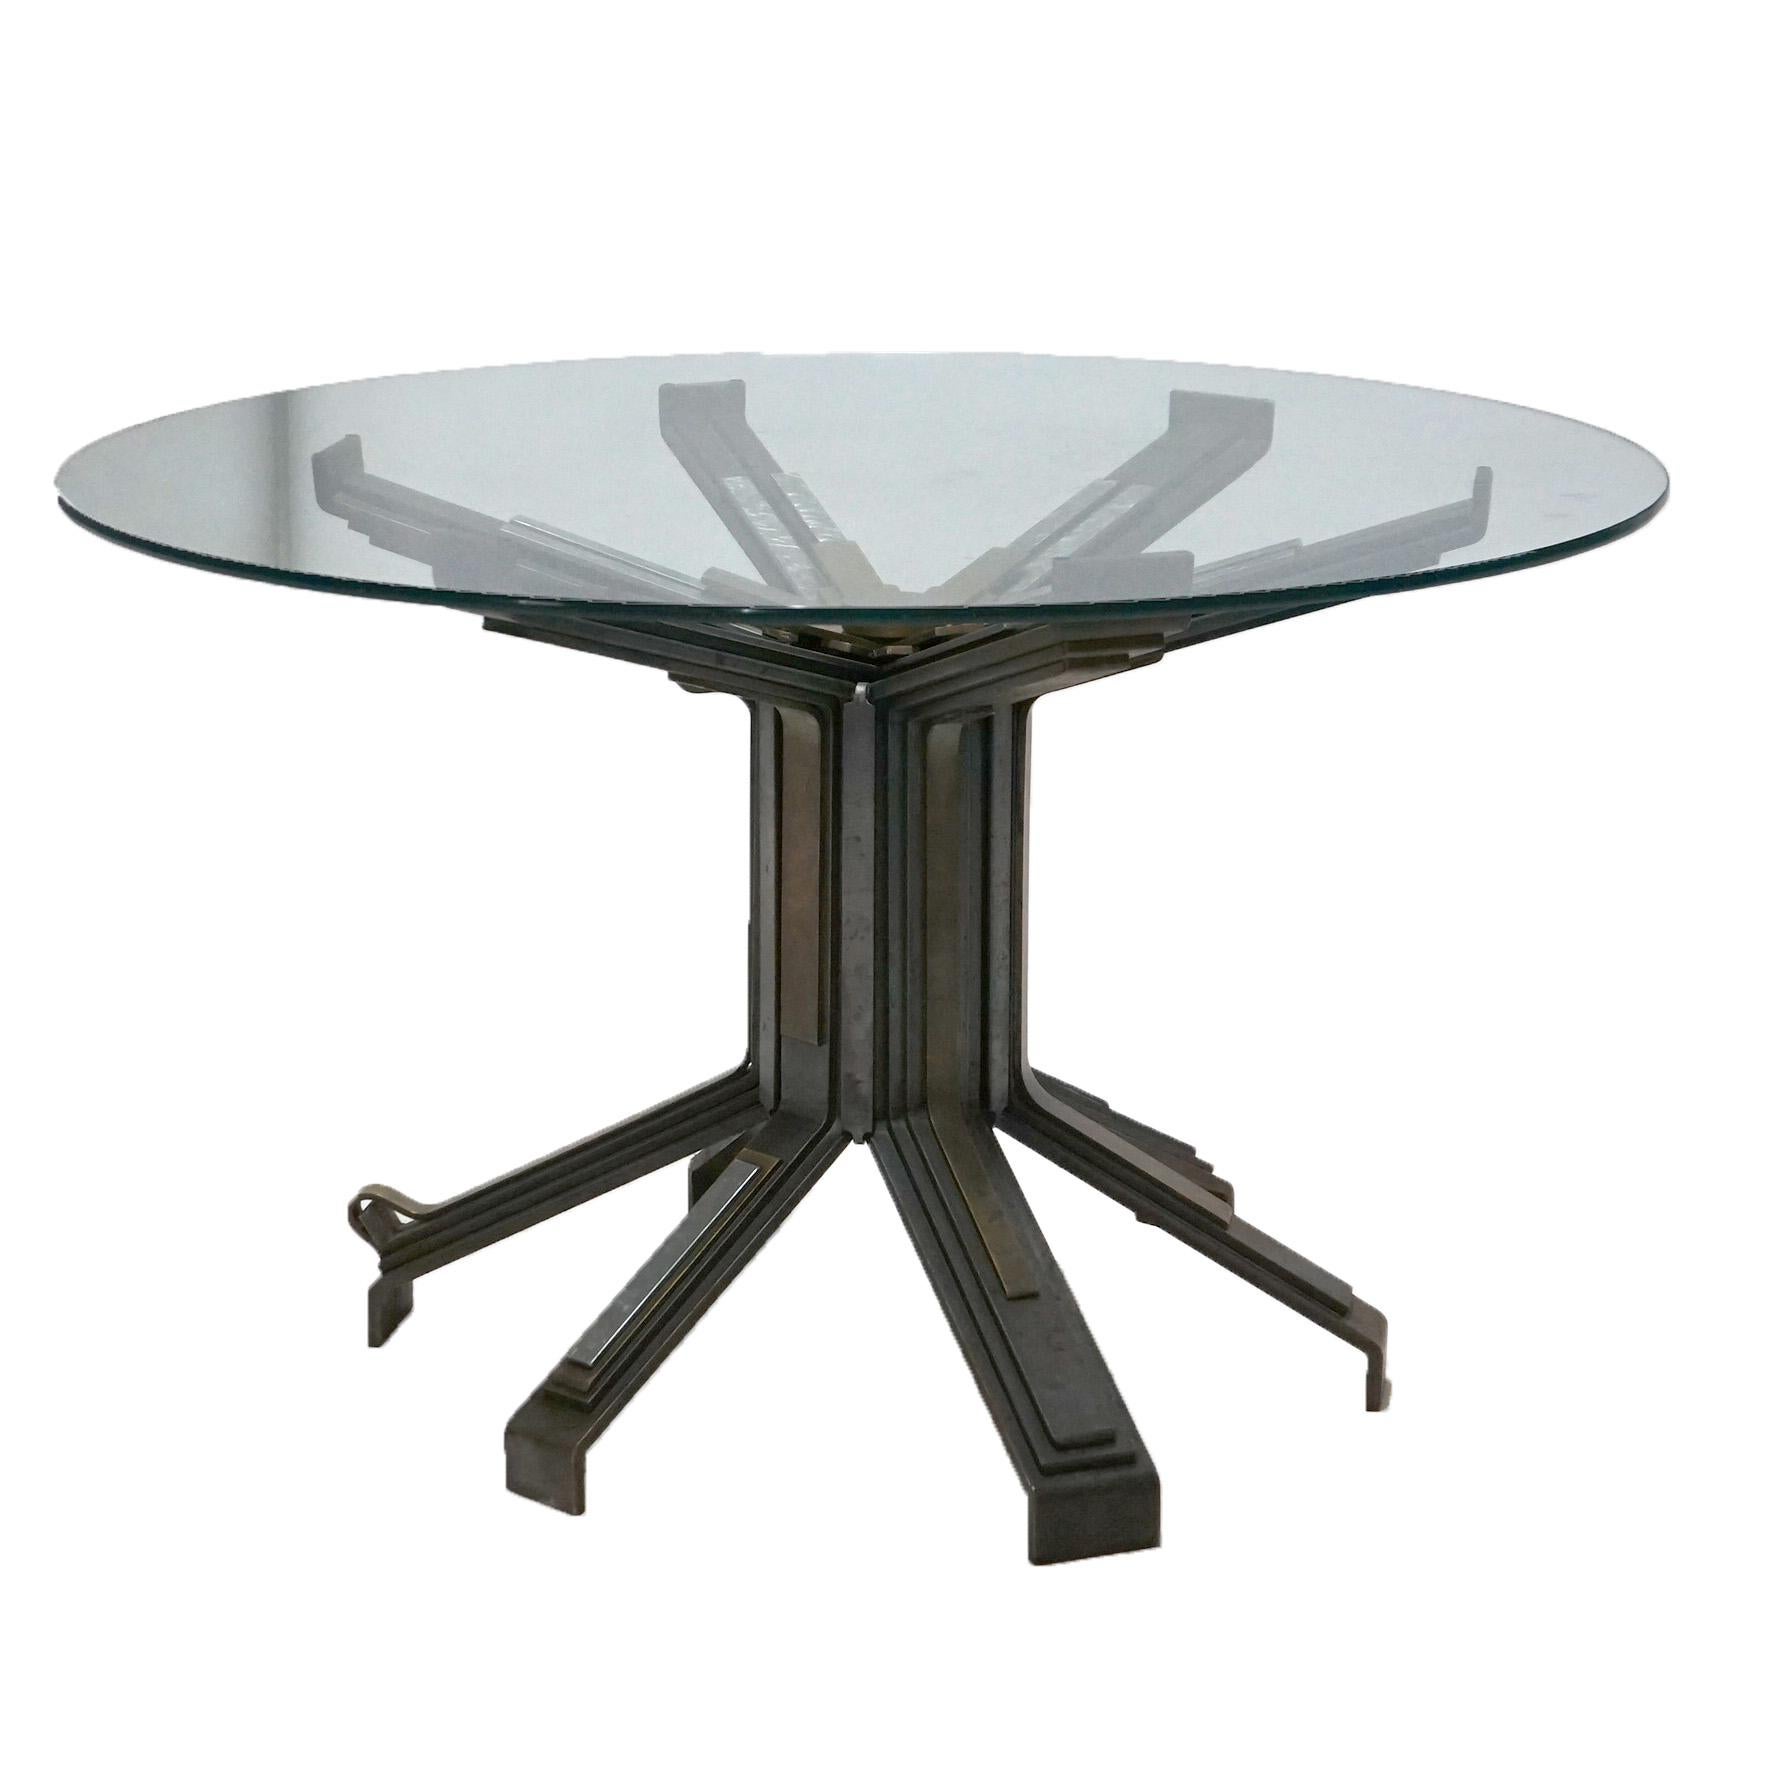 A Mid Century Modern Brutalist style table signed Monty W. Stephenson 1985
offers circular glass top over base with brushed steel, bronze & brass base in stylized sunburst form and raised on six spider legs, 1985.

Measures - 29.5